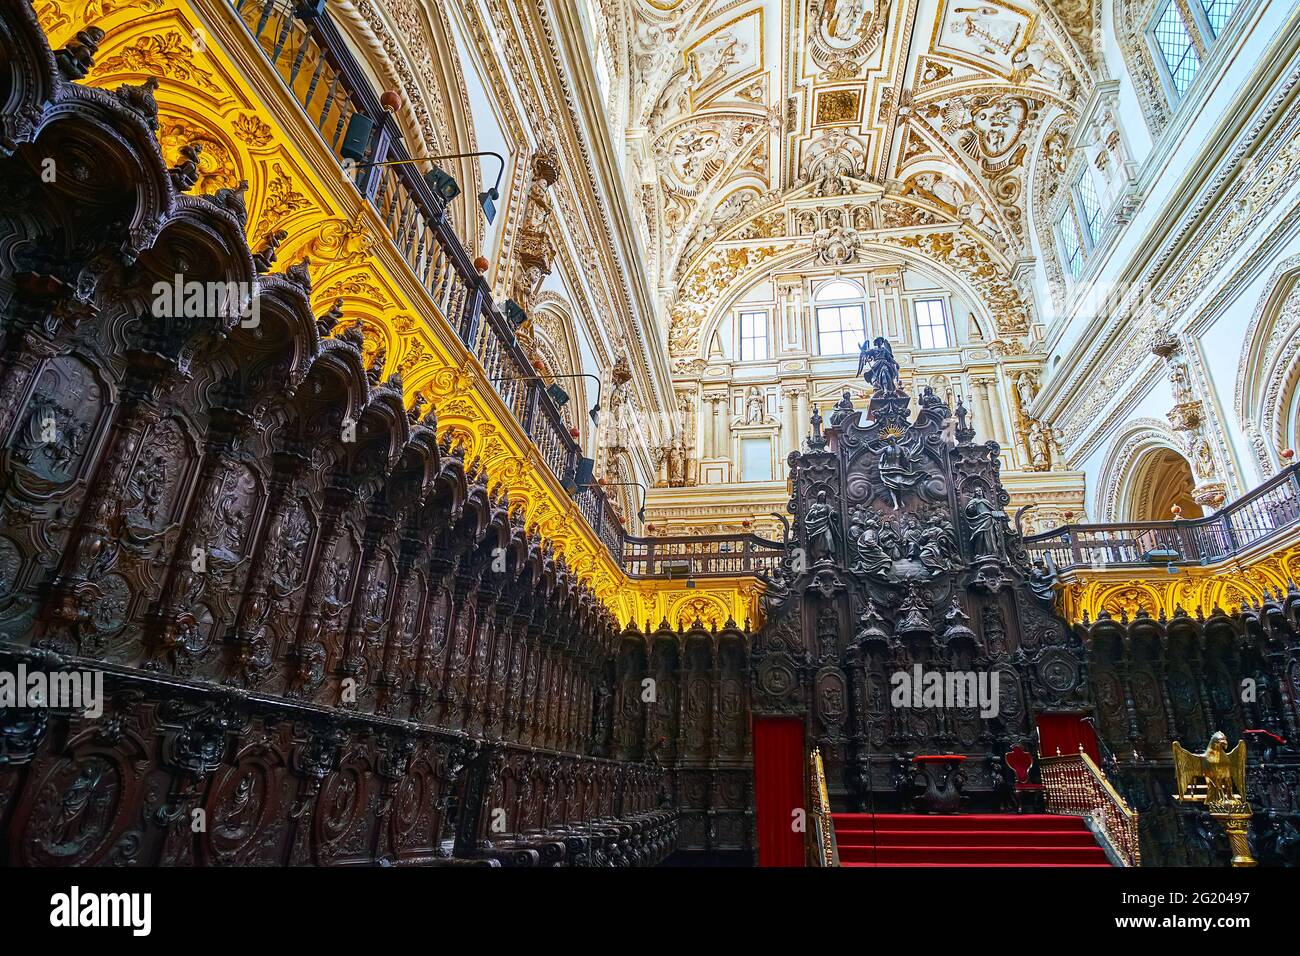 CORDOBA, SPAIN - SEP 30, 2019: The outstanding mahogany wooden choir stalls  in Capilla Mayor (Main Chapel) of Mezquita- Catedral, on Sep 30 in Cordob Stock Photo